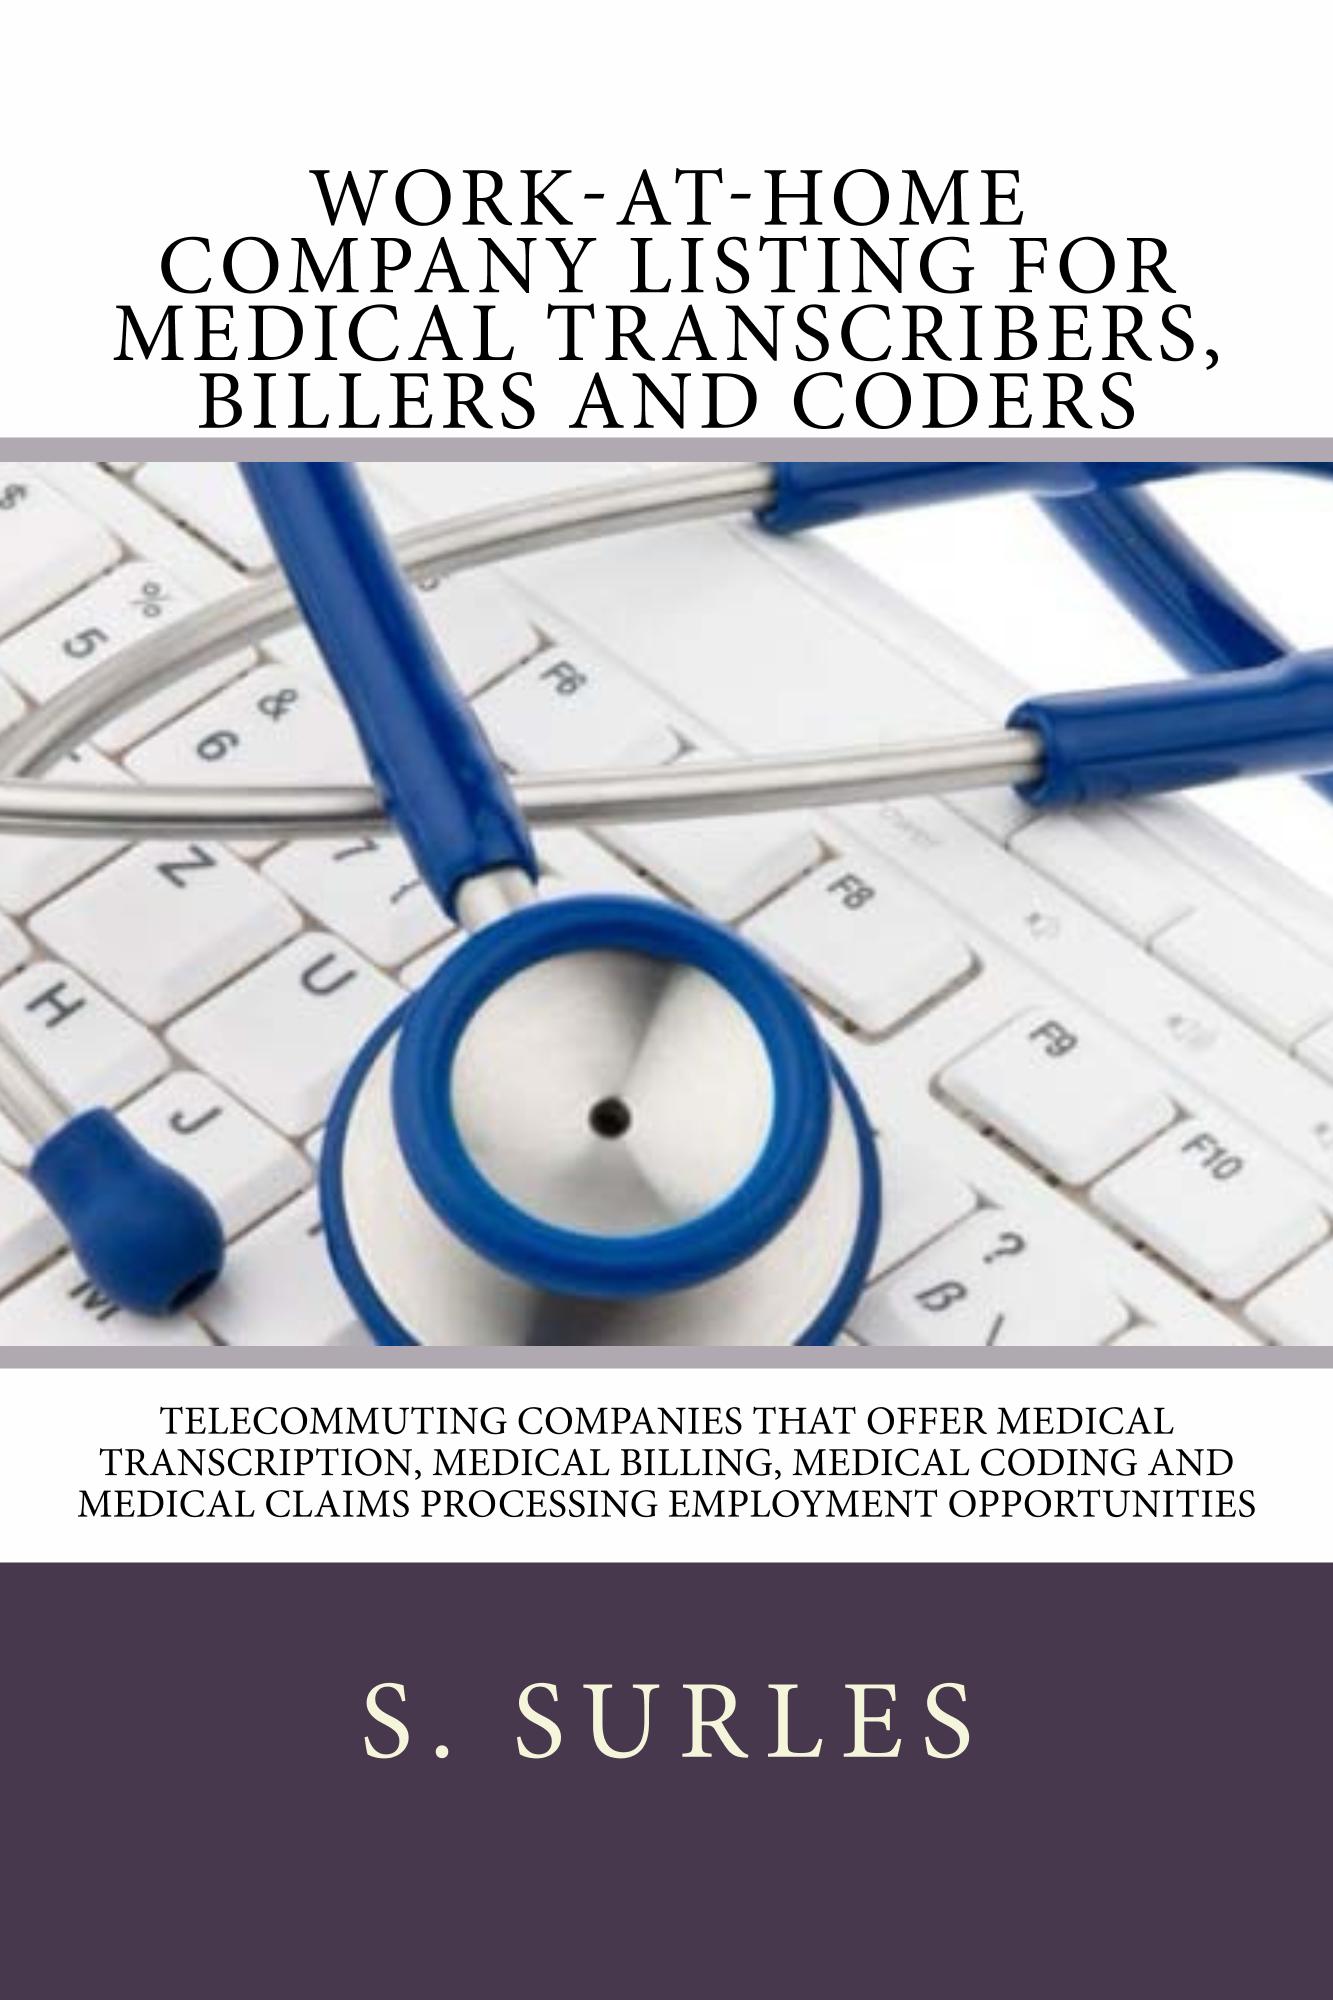 Work-at-Home Company Listing for Medical Transcribers, Billers and Coders. Order: https://www.paypal.me/HEA/19.95 - Ebook contains hundreds of companies hiring home assembly and craft workers each year nationwide and globally. Purchase today for only $19.95. Free lifetime updates, no scams and no monthly fees. #ebook #medicaltranscription #medicalcoding #medicalbilling #workathome #workfromhome #jobs #jobsearch #careers #telecommuting